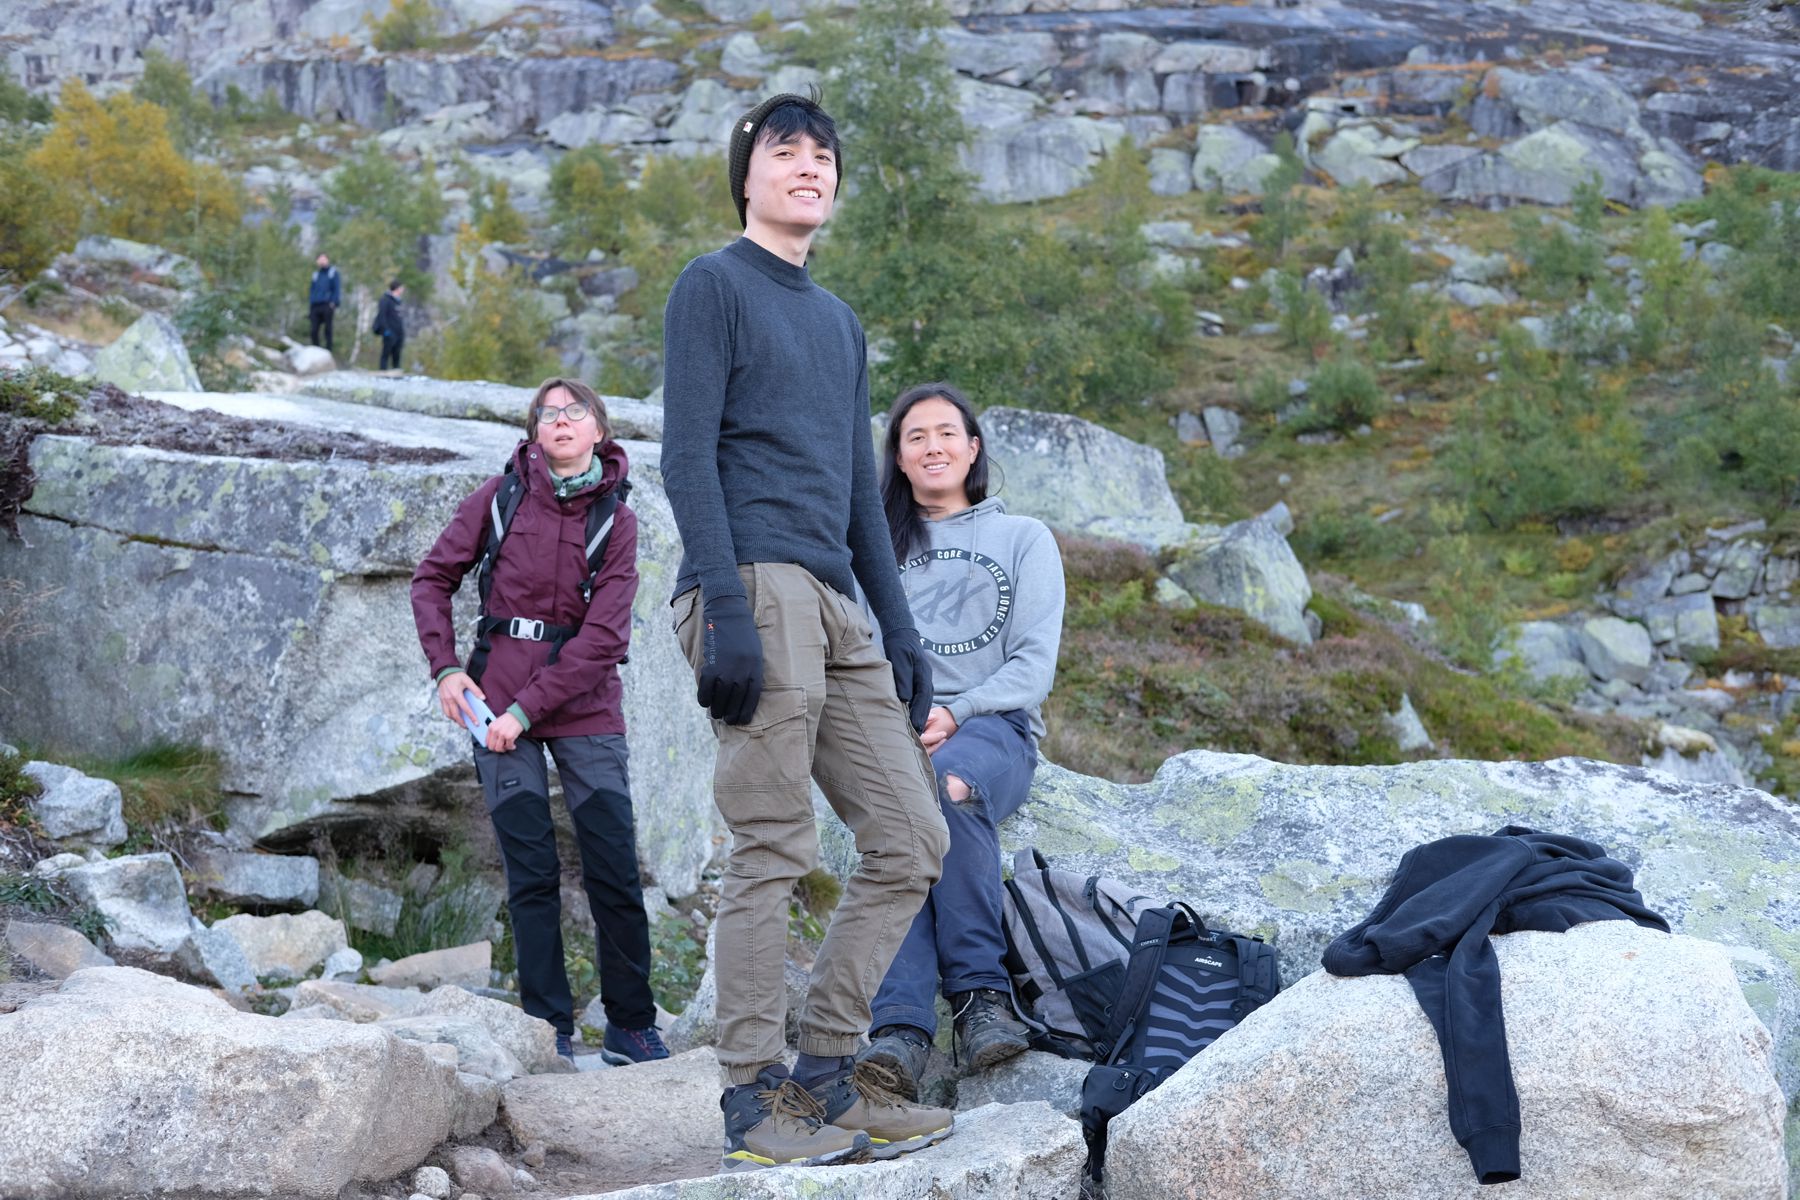 The patchwork family at the start of the Trolltunga walk.